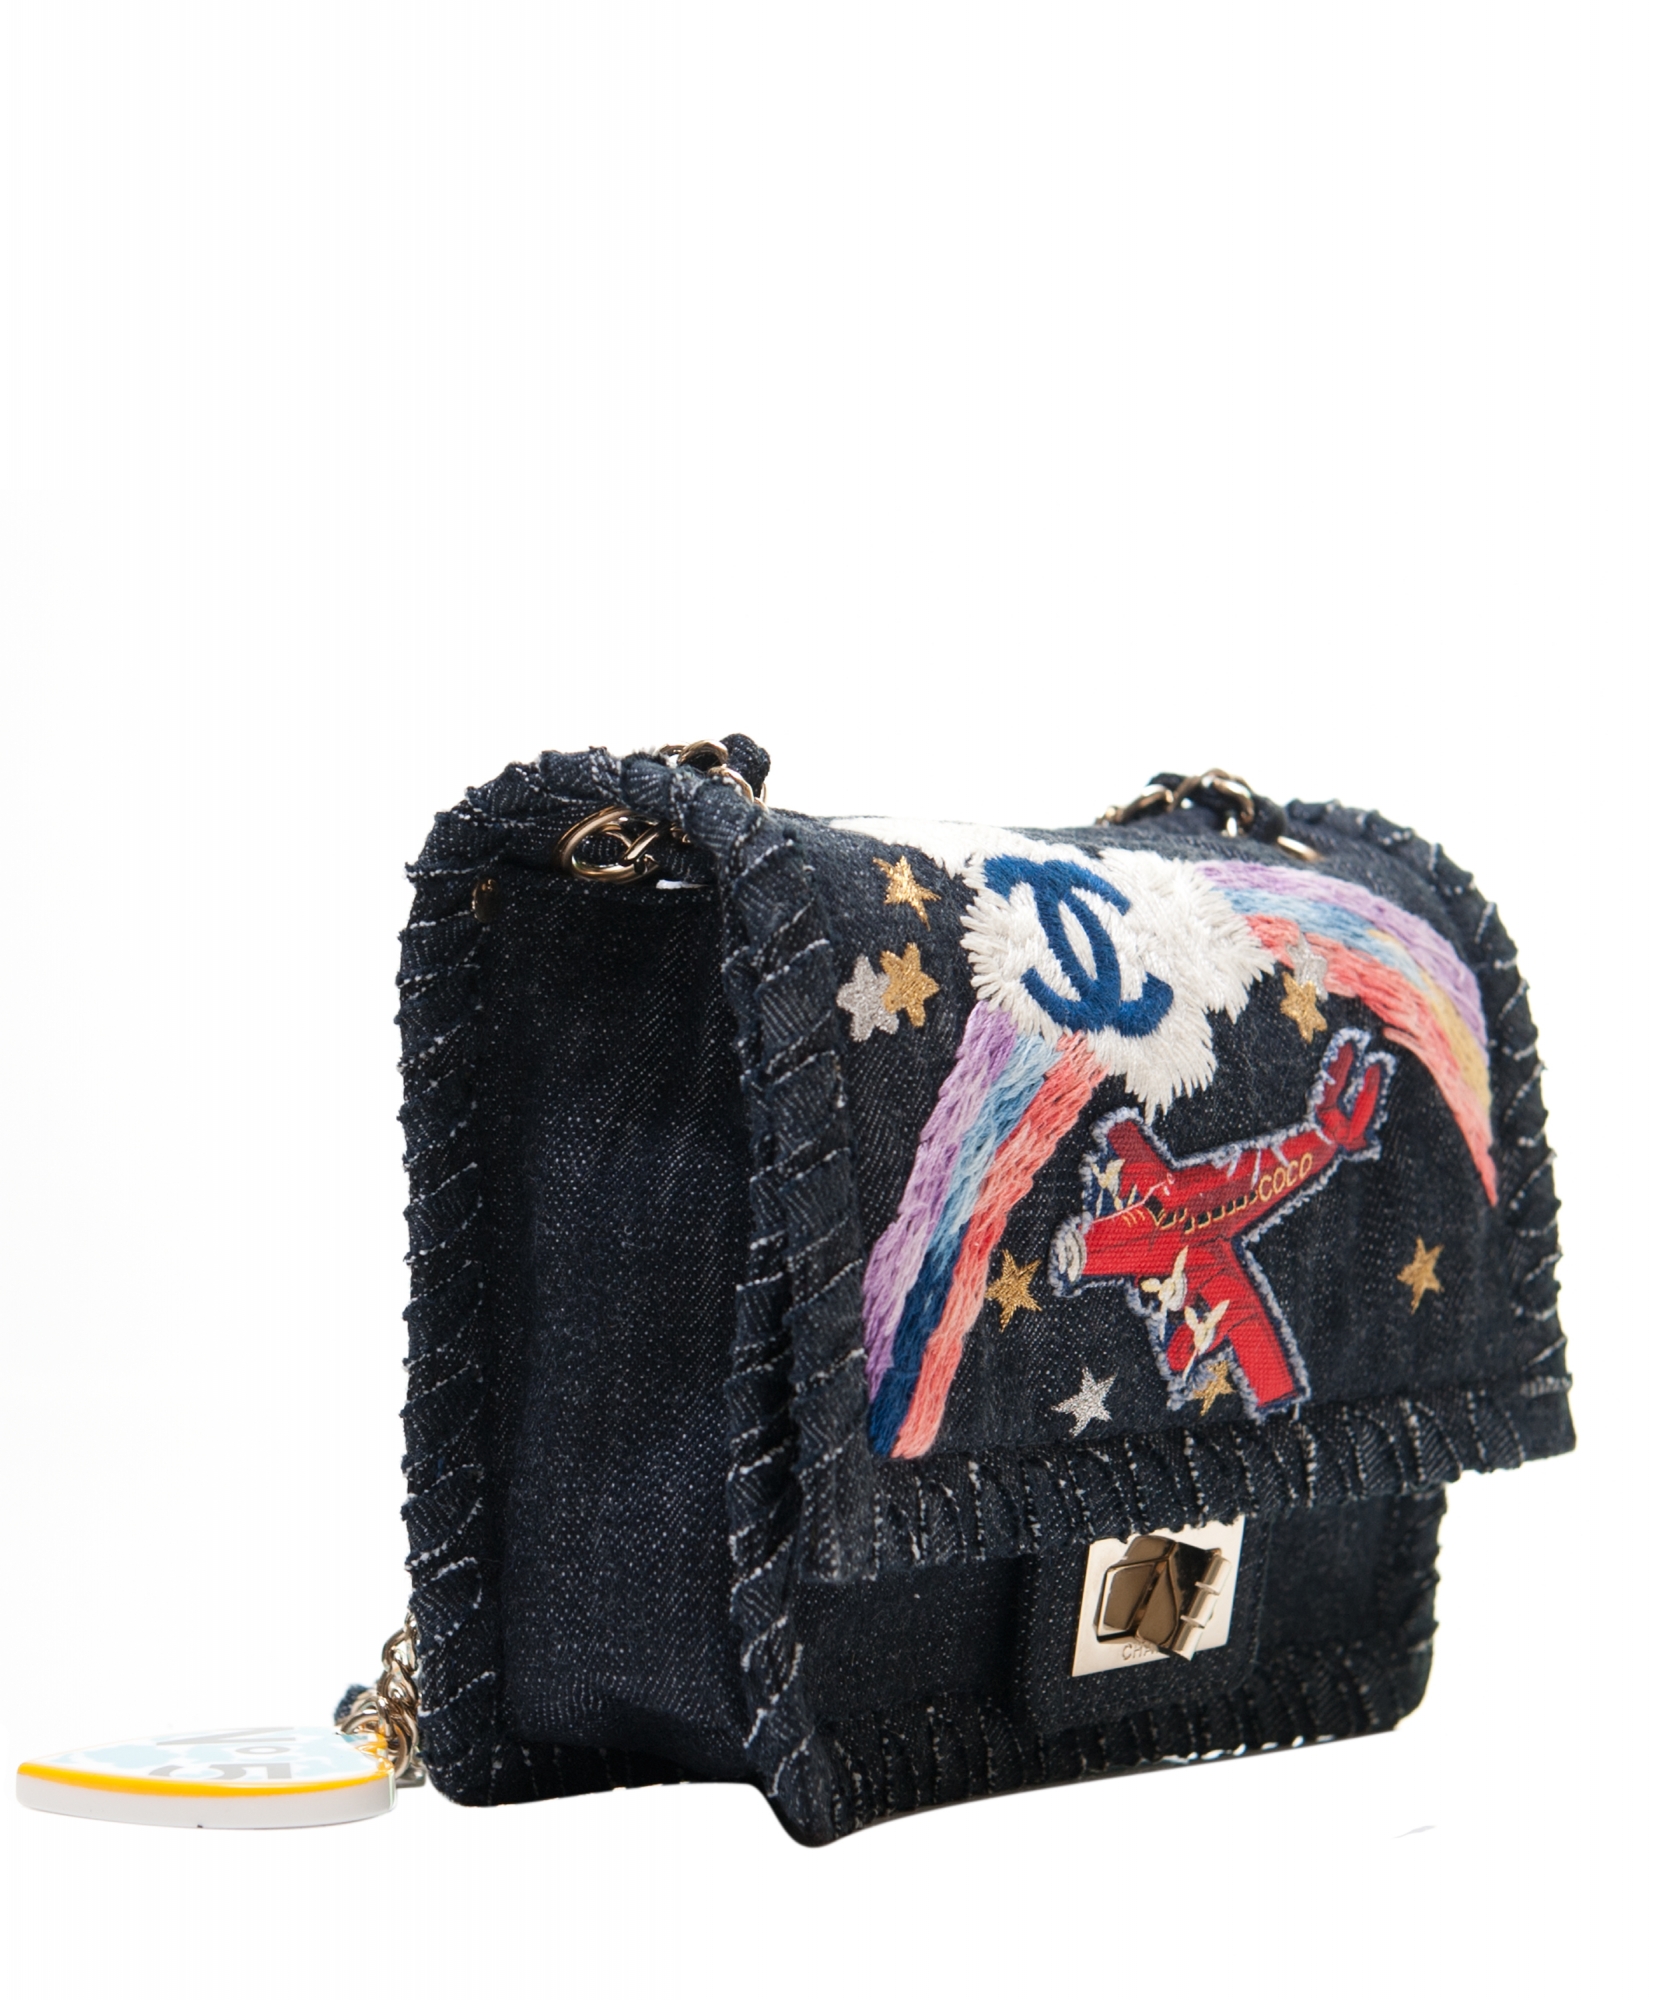 Chanel Denim Multicolor Embroidered Flap Bag - Limited Edition